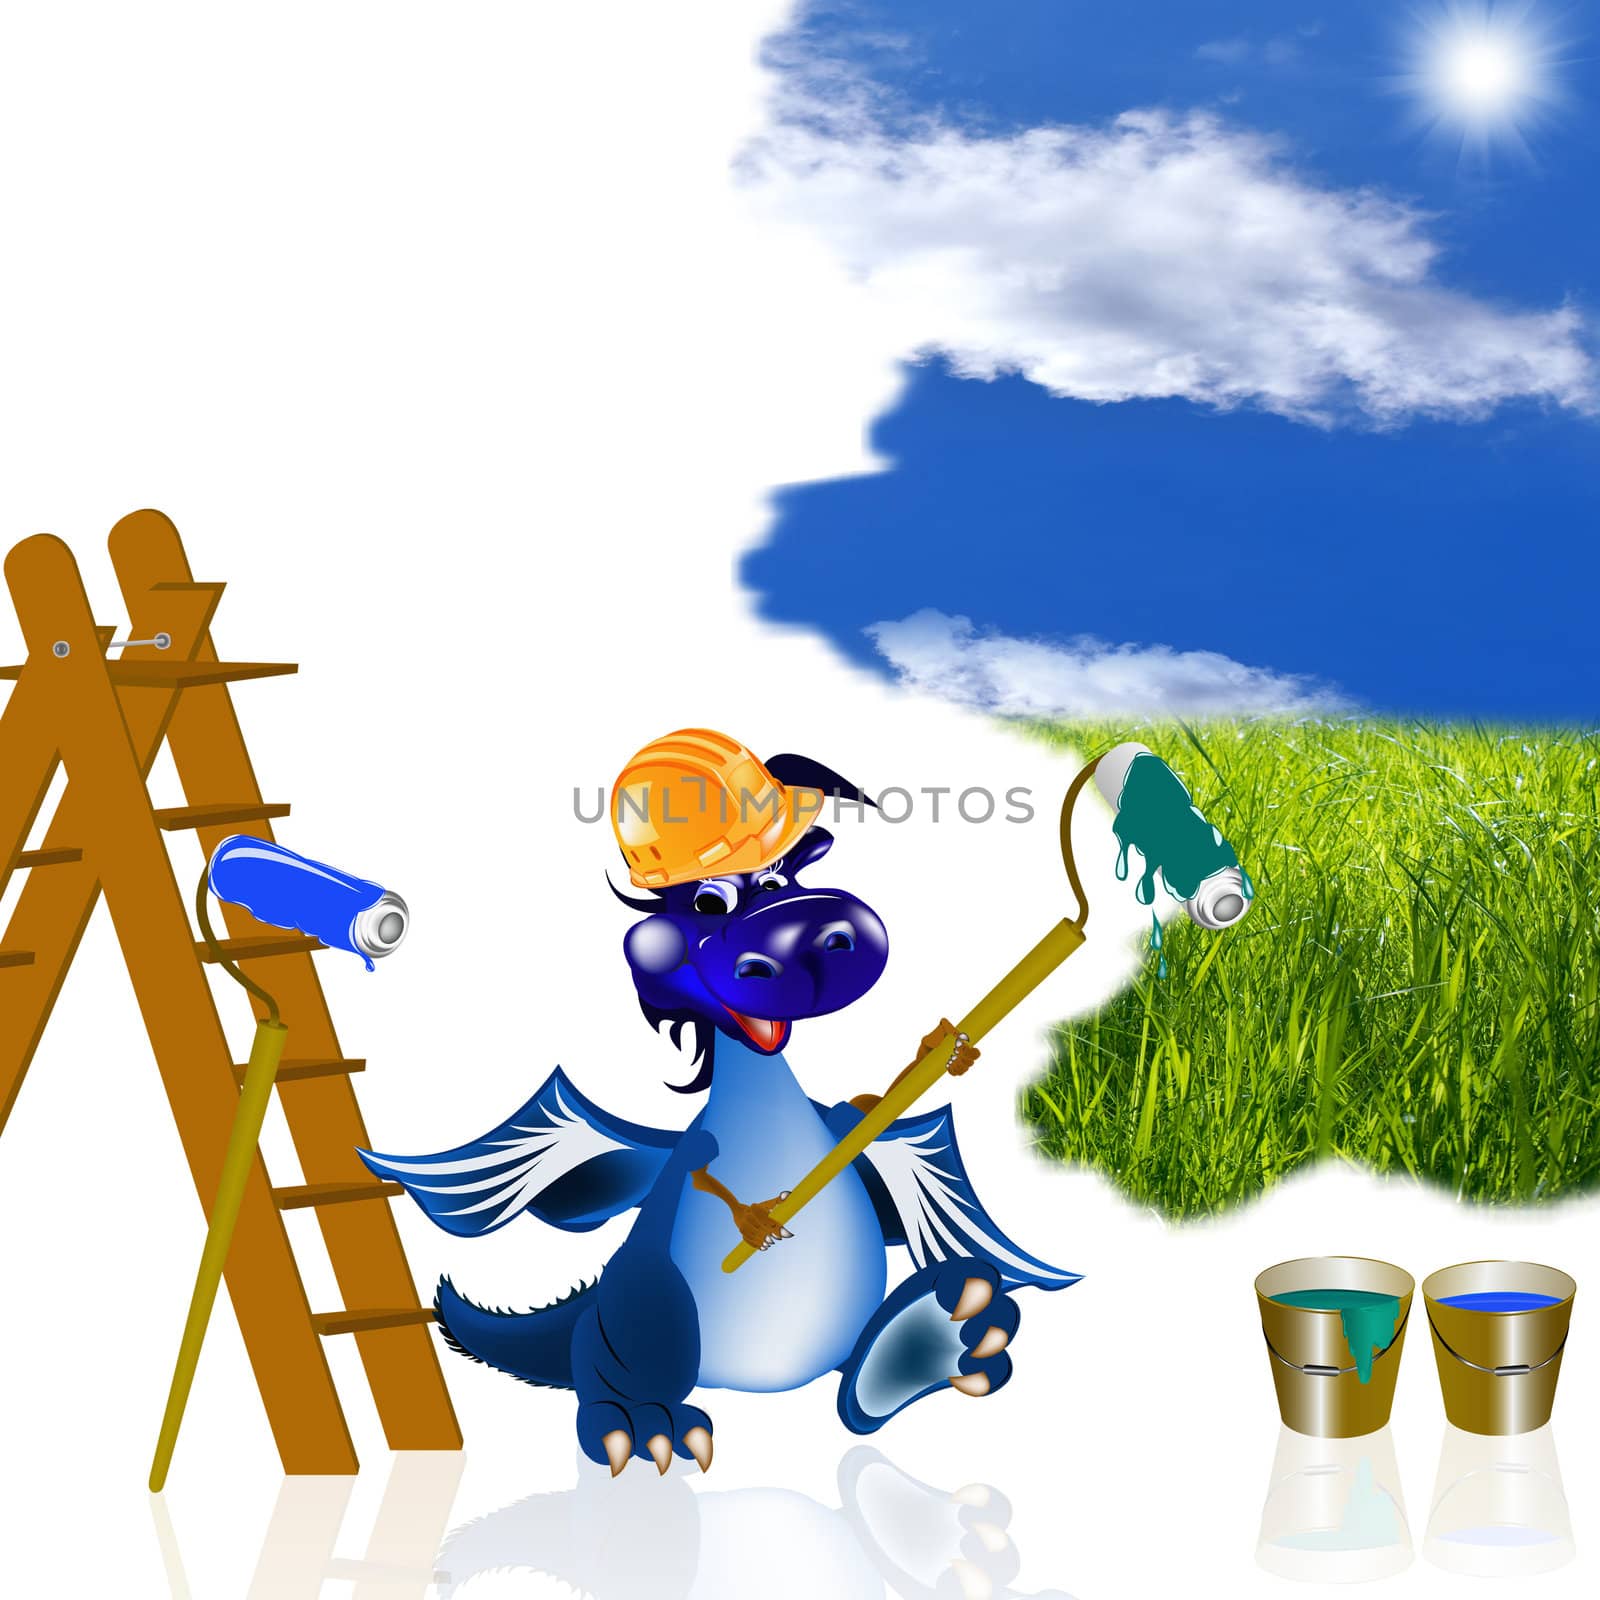 The dark blue dragon-house painter on a step-ladder will paint your life in colours of beauty and happiness